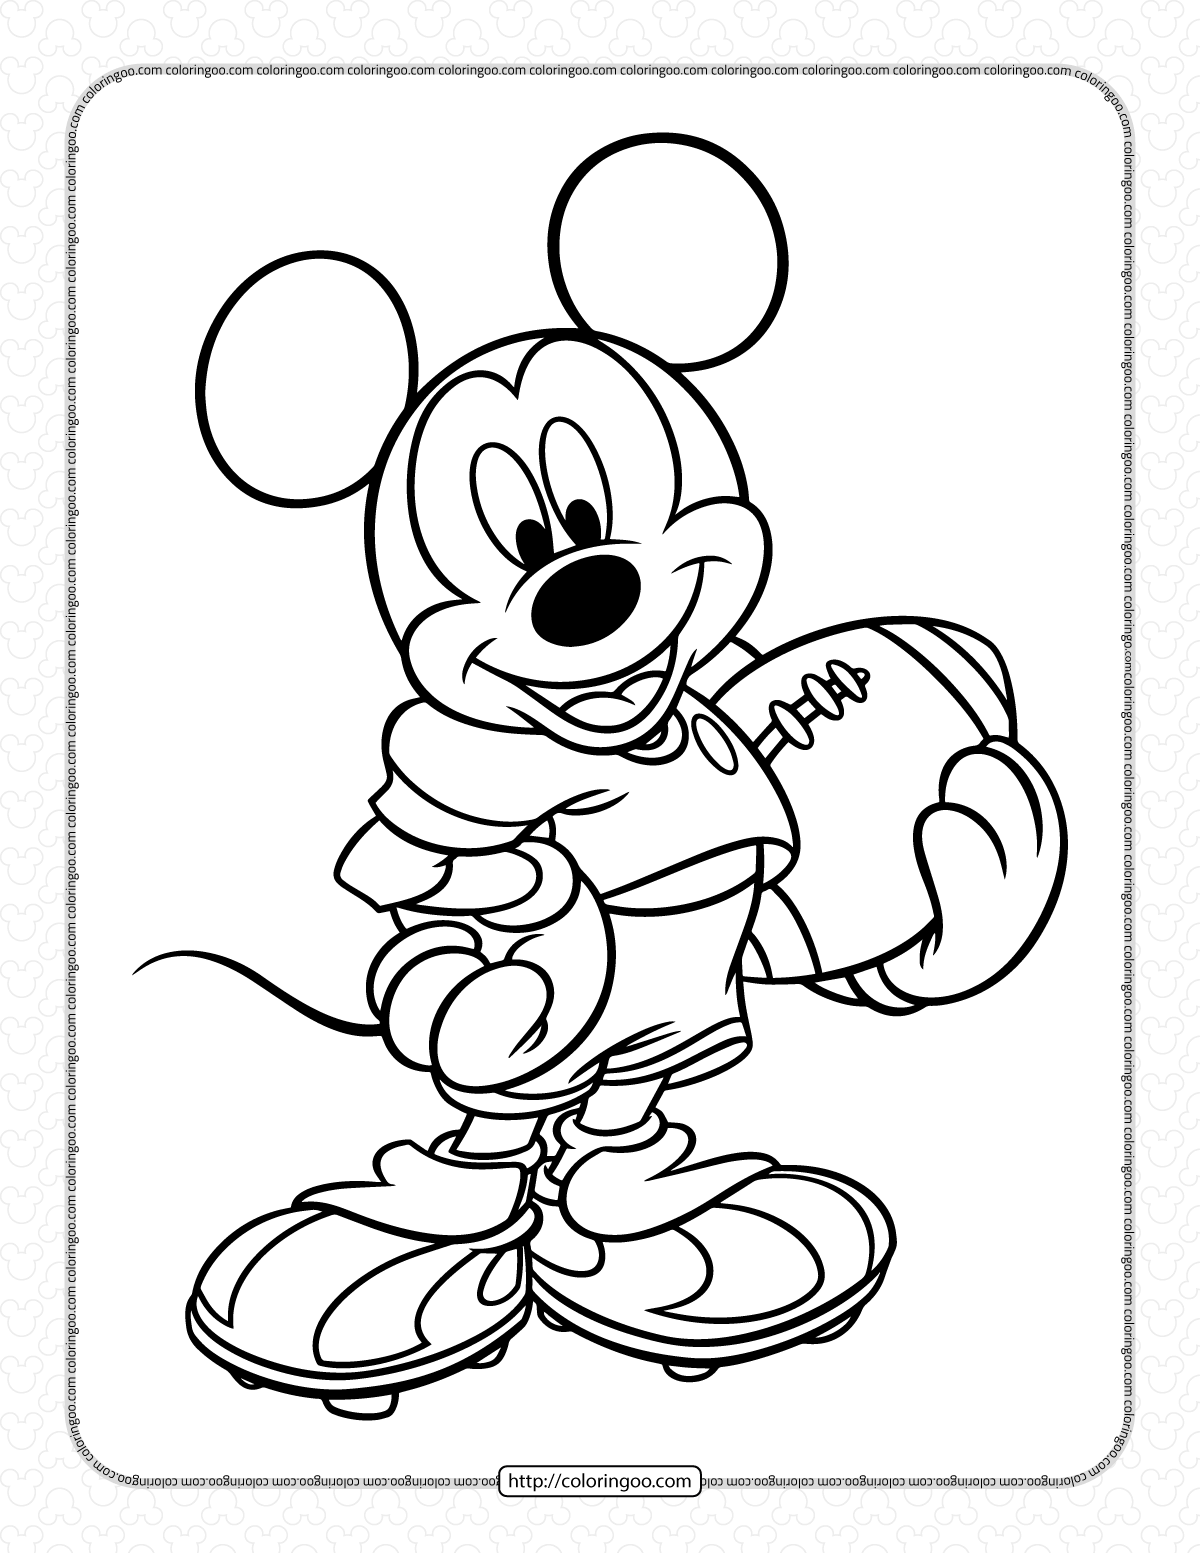 mickey mouse american football player coloring page